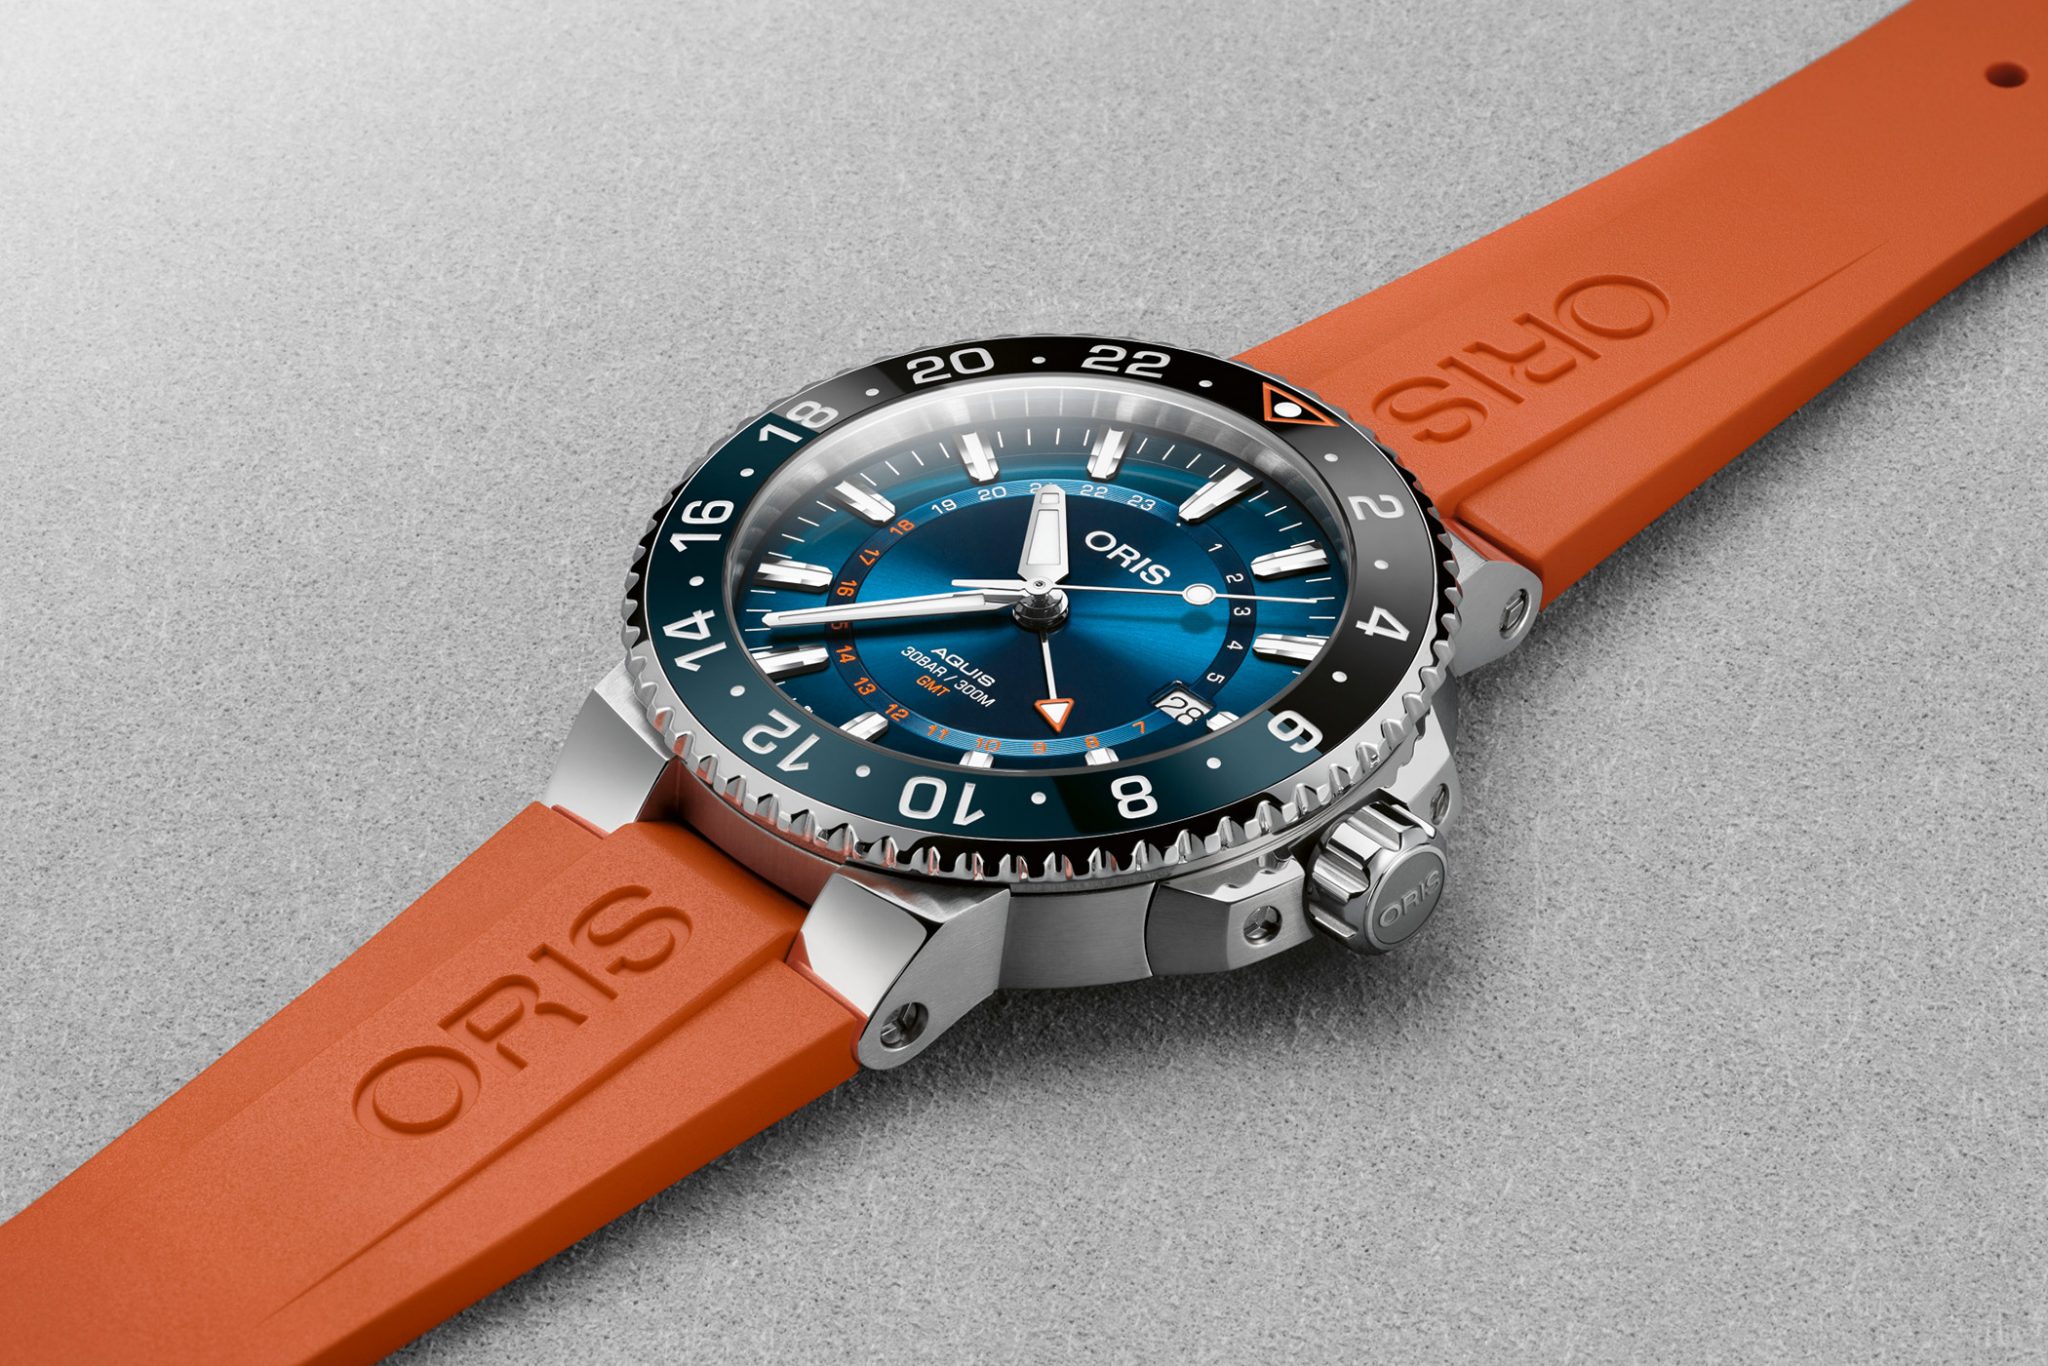 Oris-Carysfort-Reef-Limited-Edition-Support-Coral-Restoration-Foundation-ref-01-798-7754-4185-Set-02